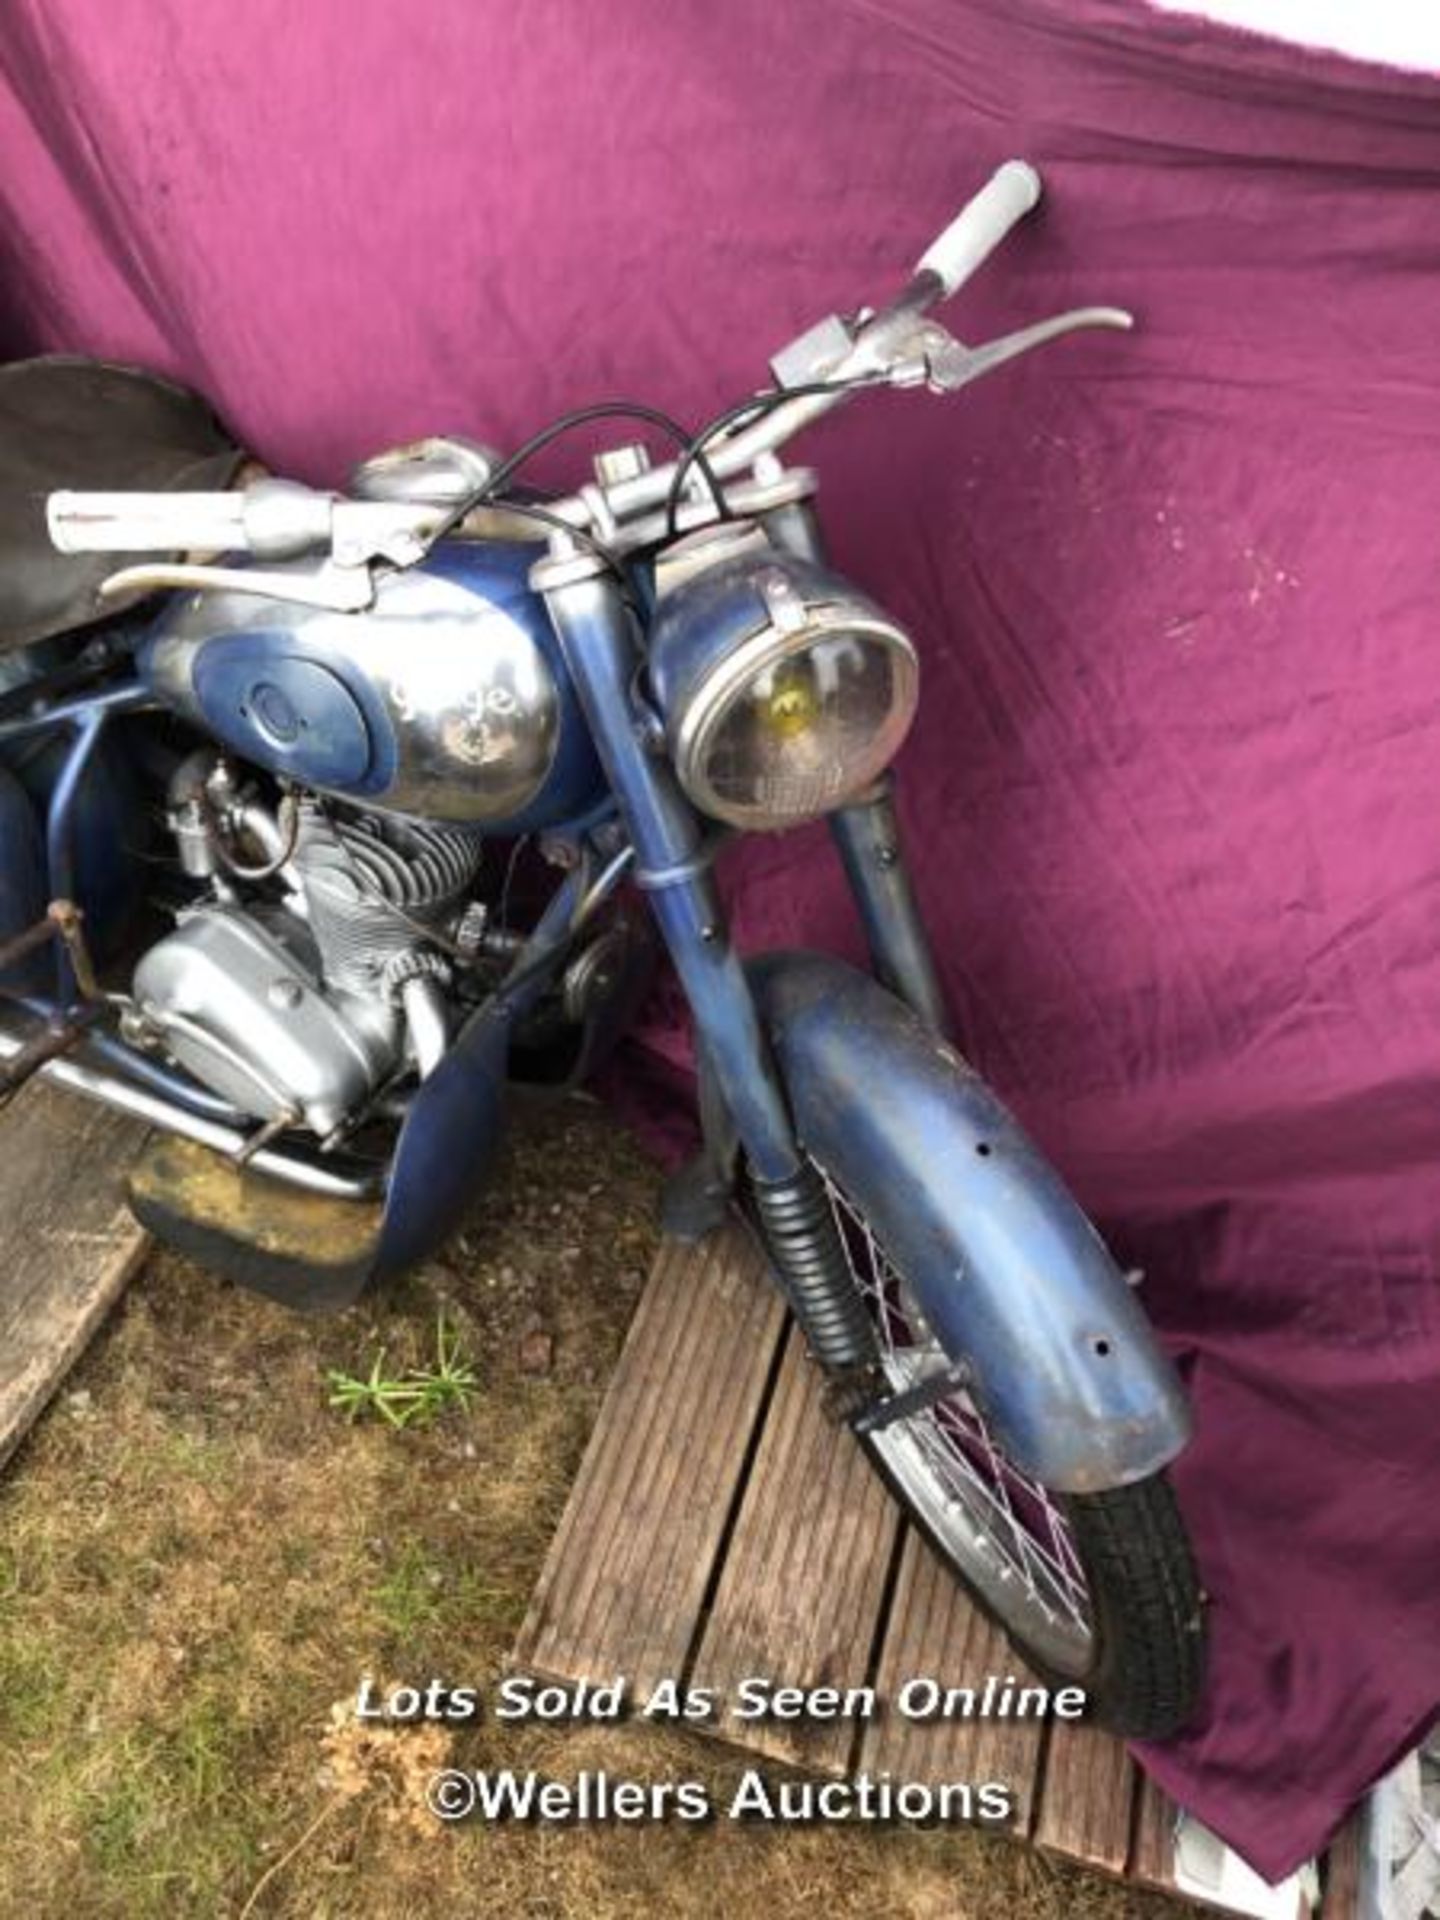 PEUGEOT 125 1955 MOTORCYCLE, FOR RESTORATION - This lot is located away from the auction site, to - Image 2 of 10